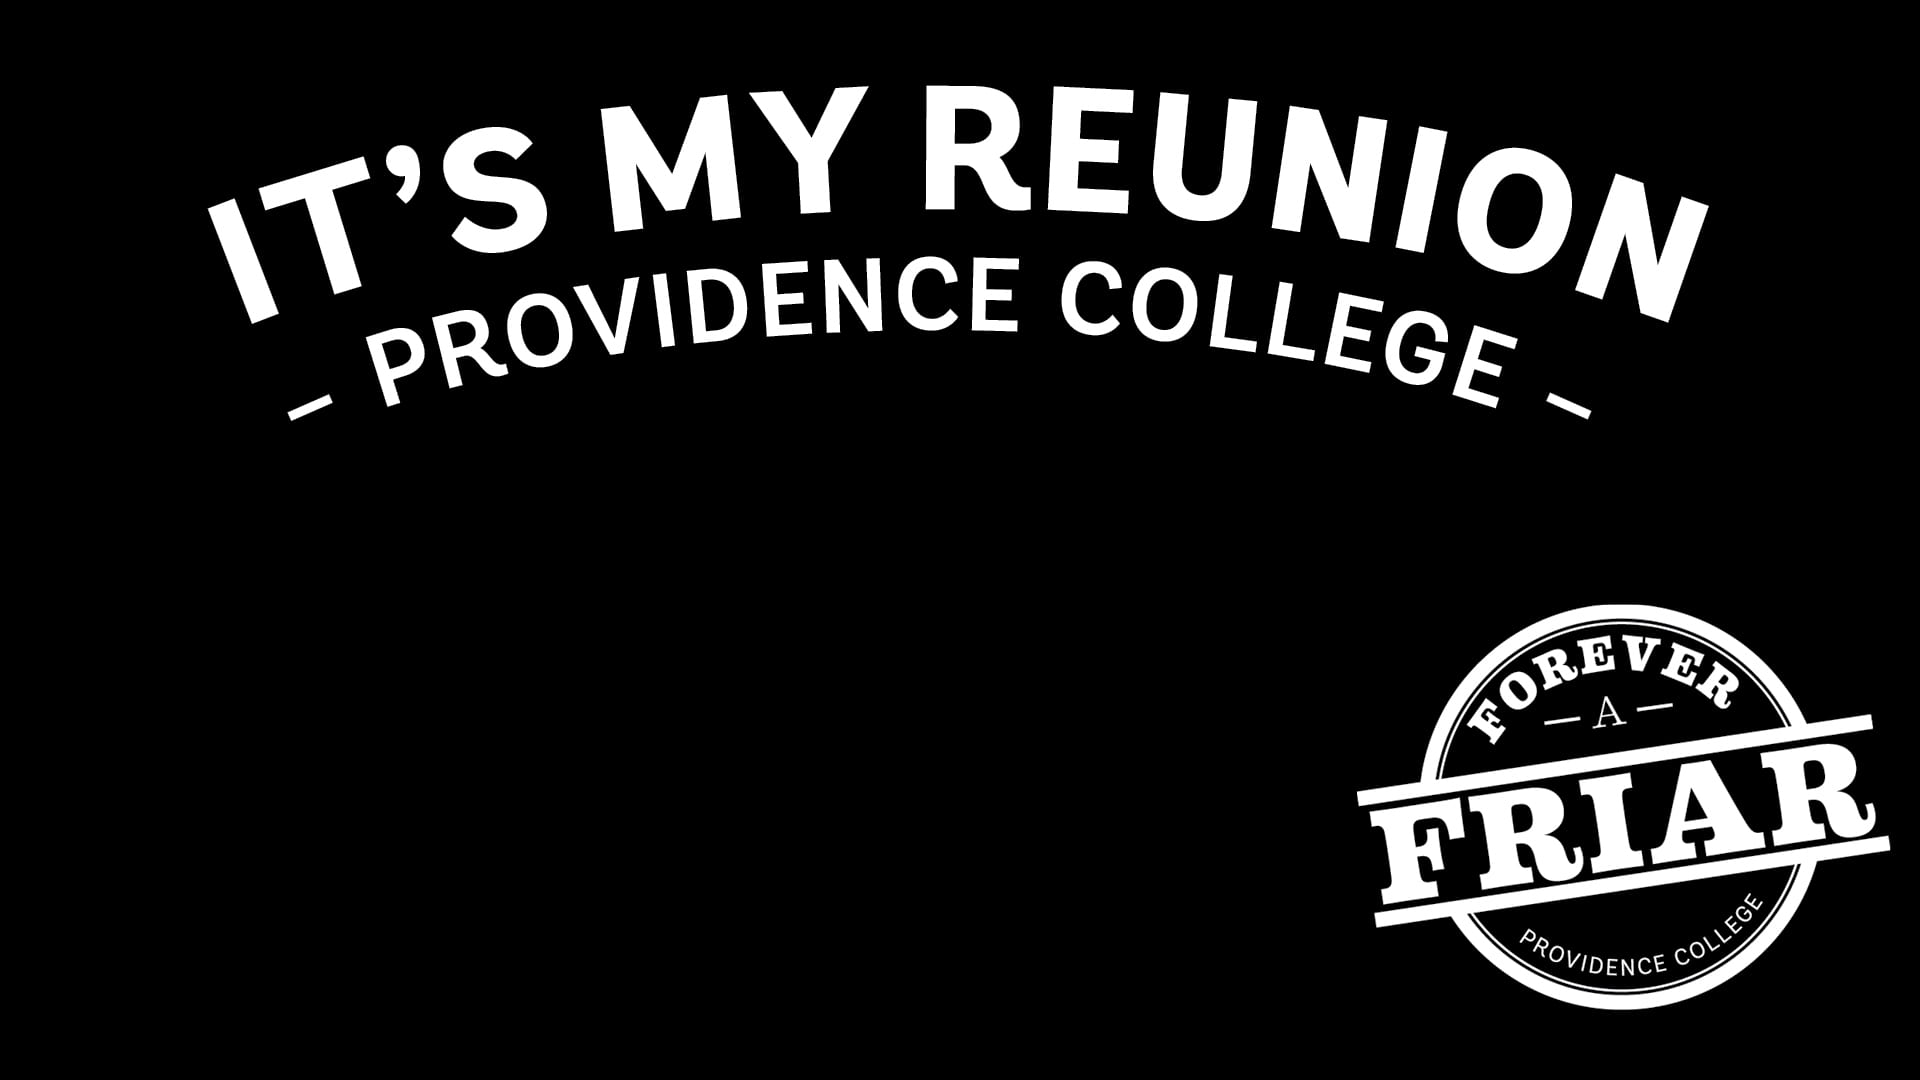 Download a Reunion Zoom background Alumni, Family